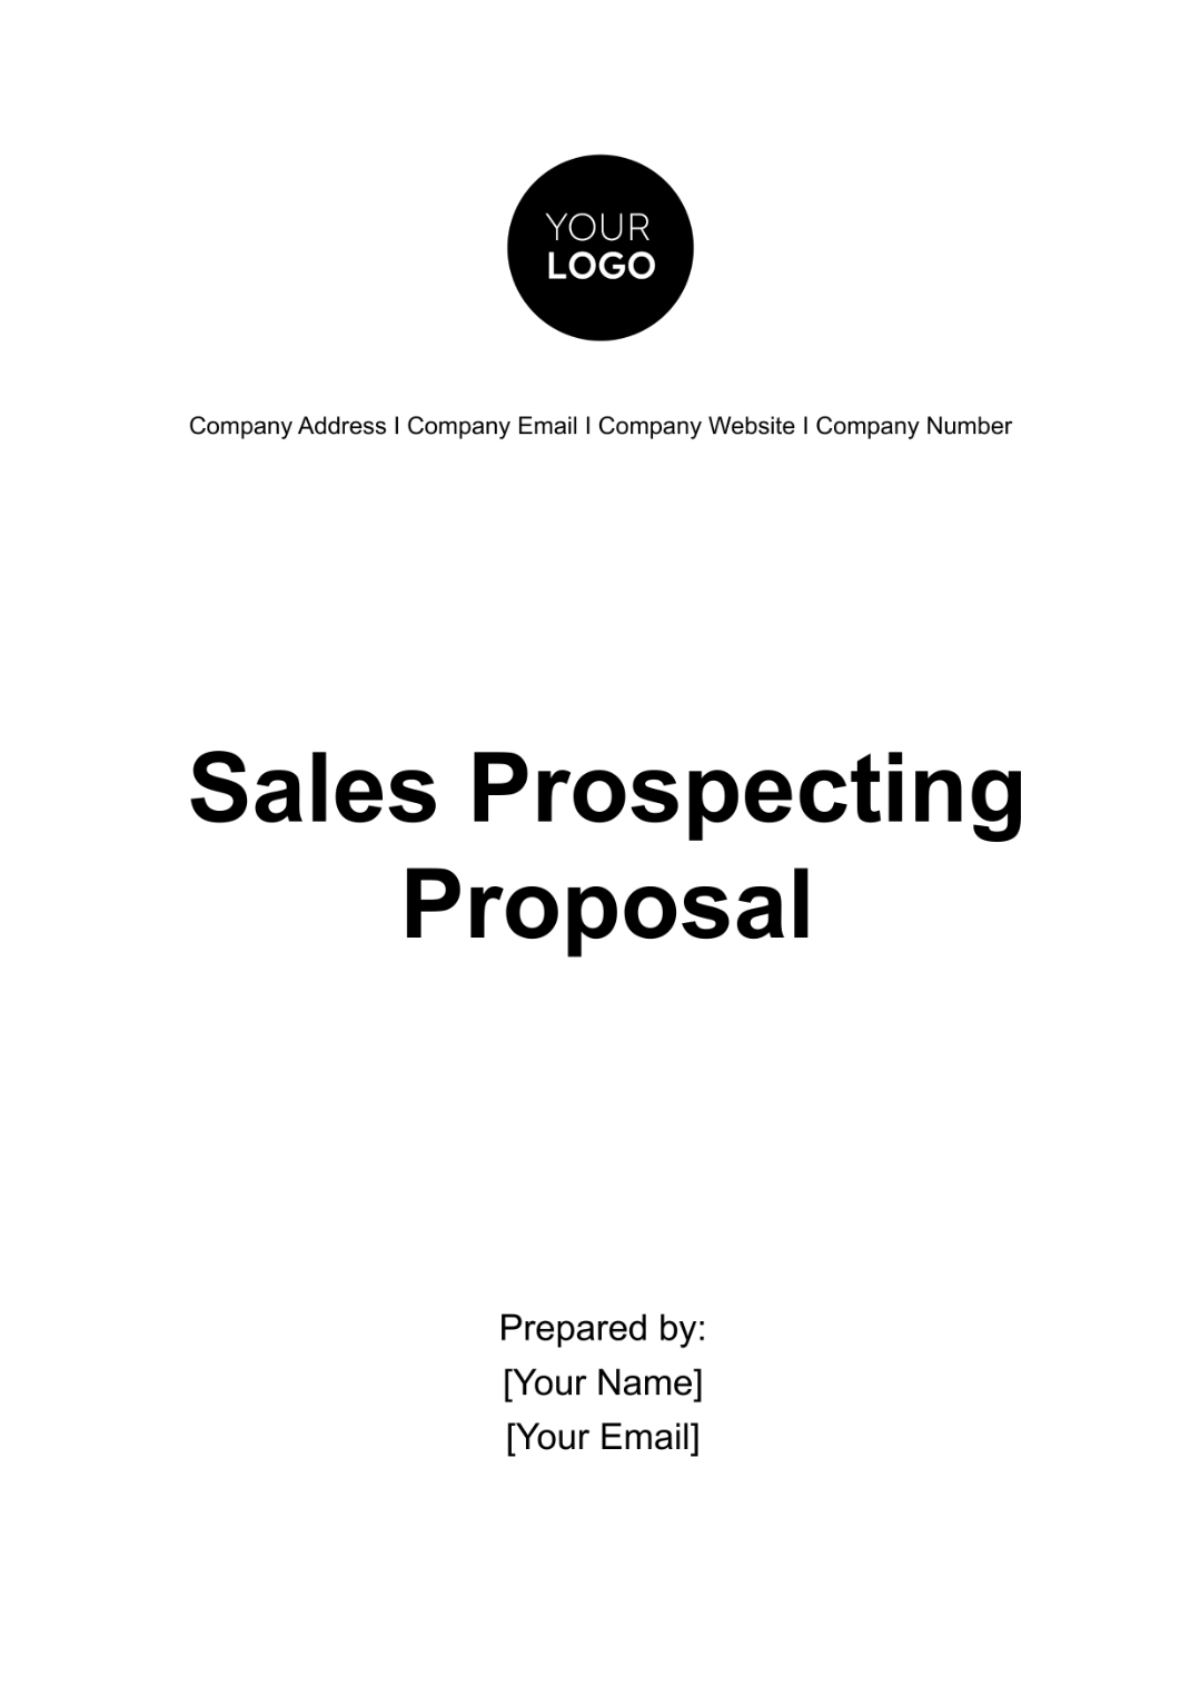 Sales Prospecting Proposal Template